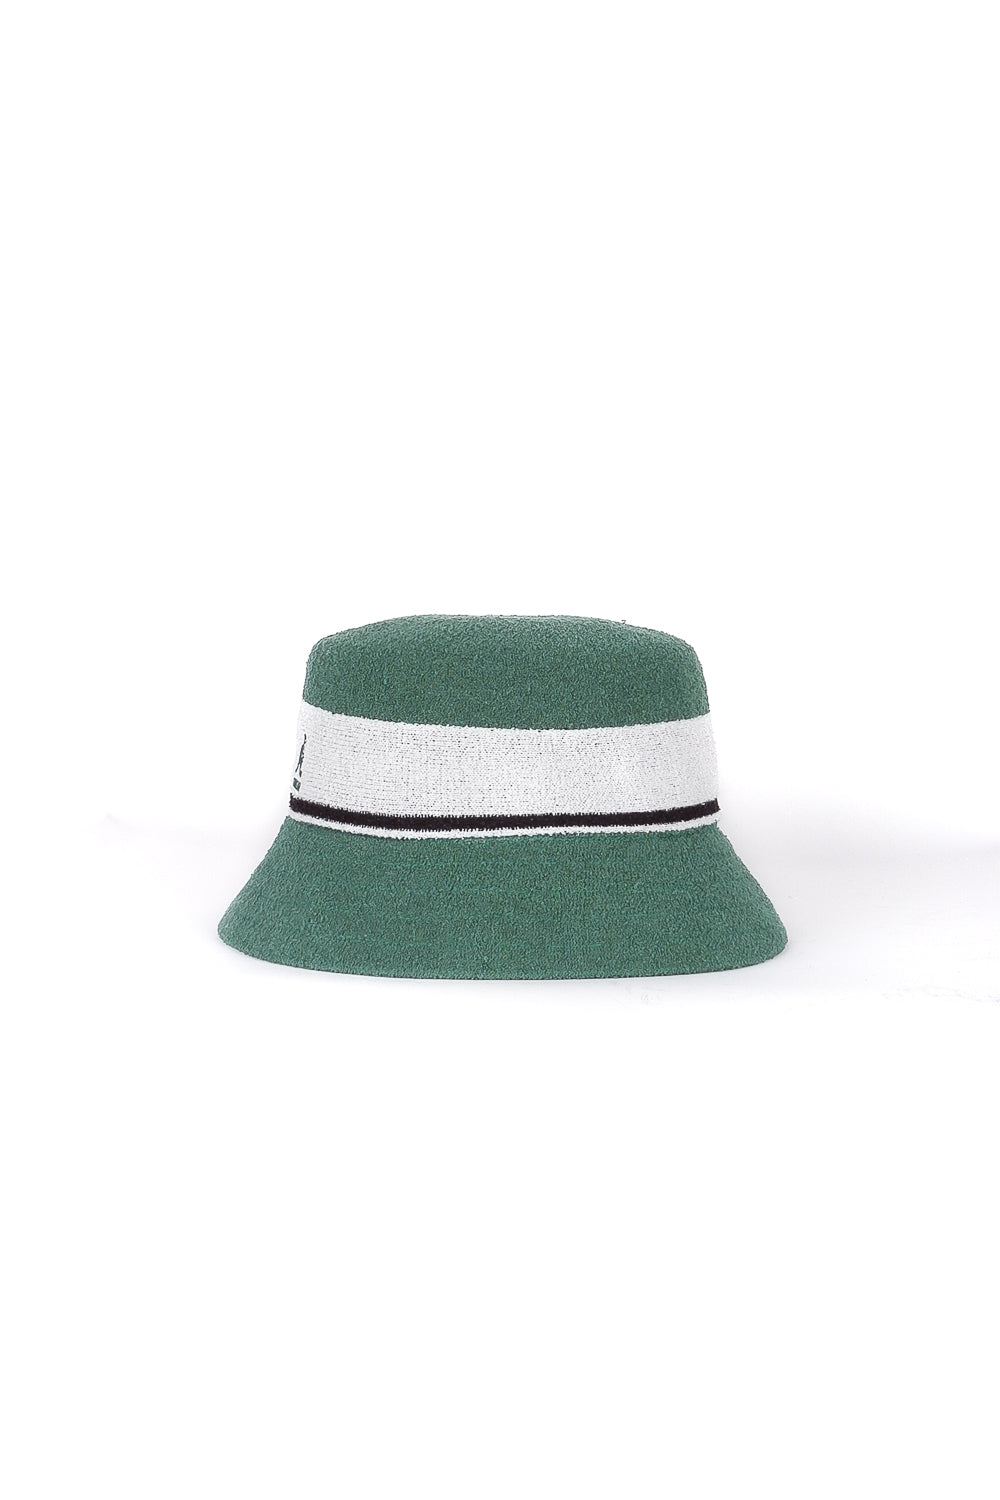 Buy the Kangol Bermuda Stripe Bucket Hat Turf Green at Intro. Spend £50 for free UK delivery. Official stockists. We ship worldwide.